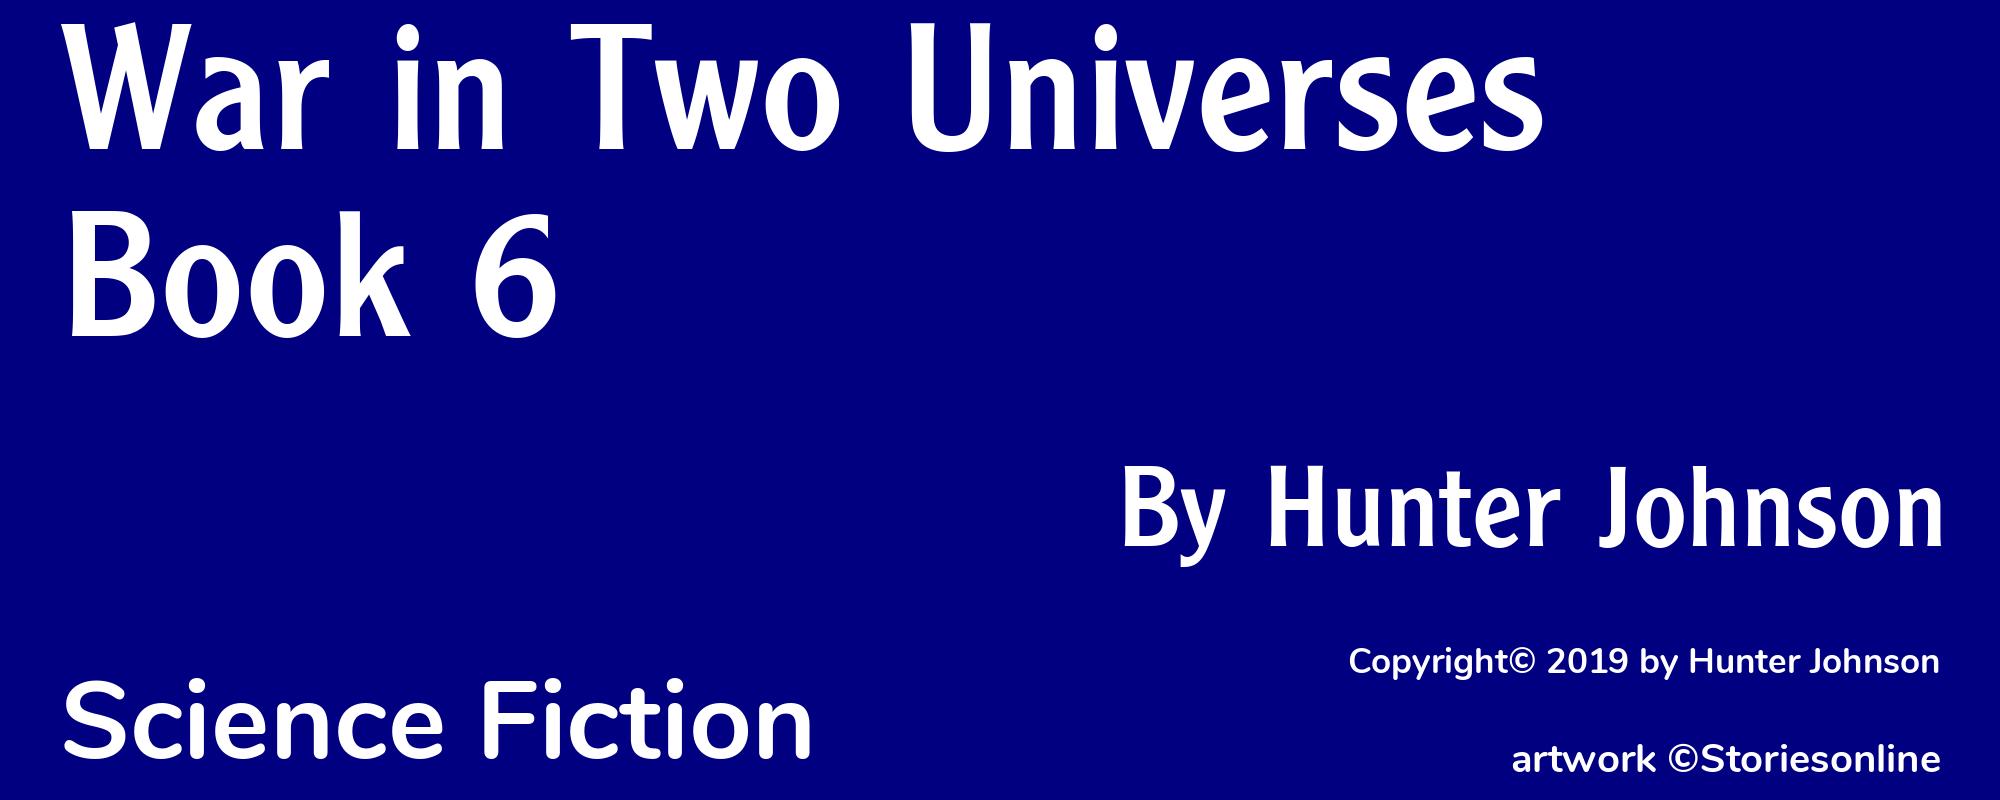 War in Two Universes Book 6 - Cover